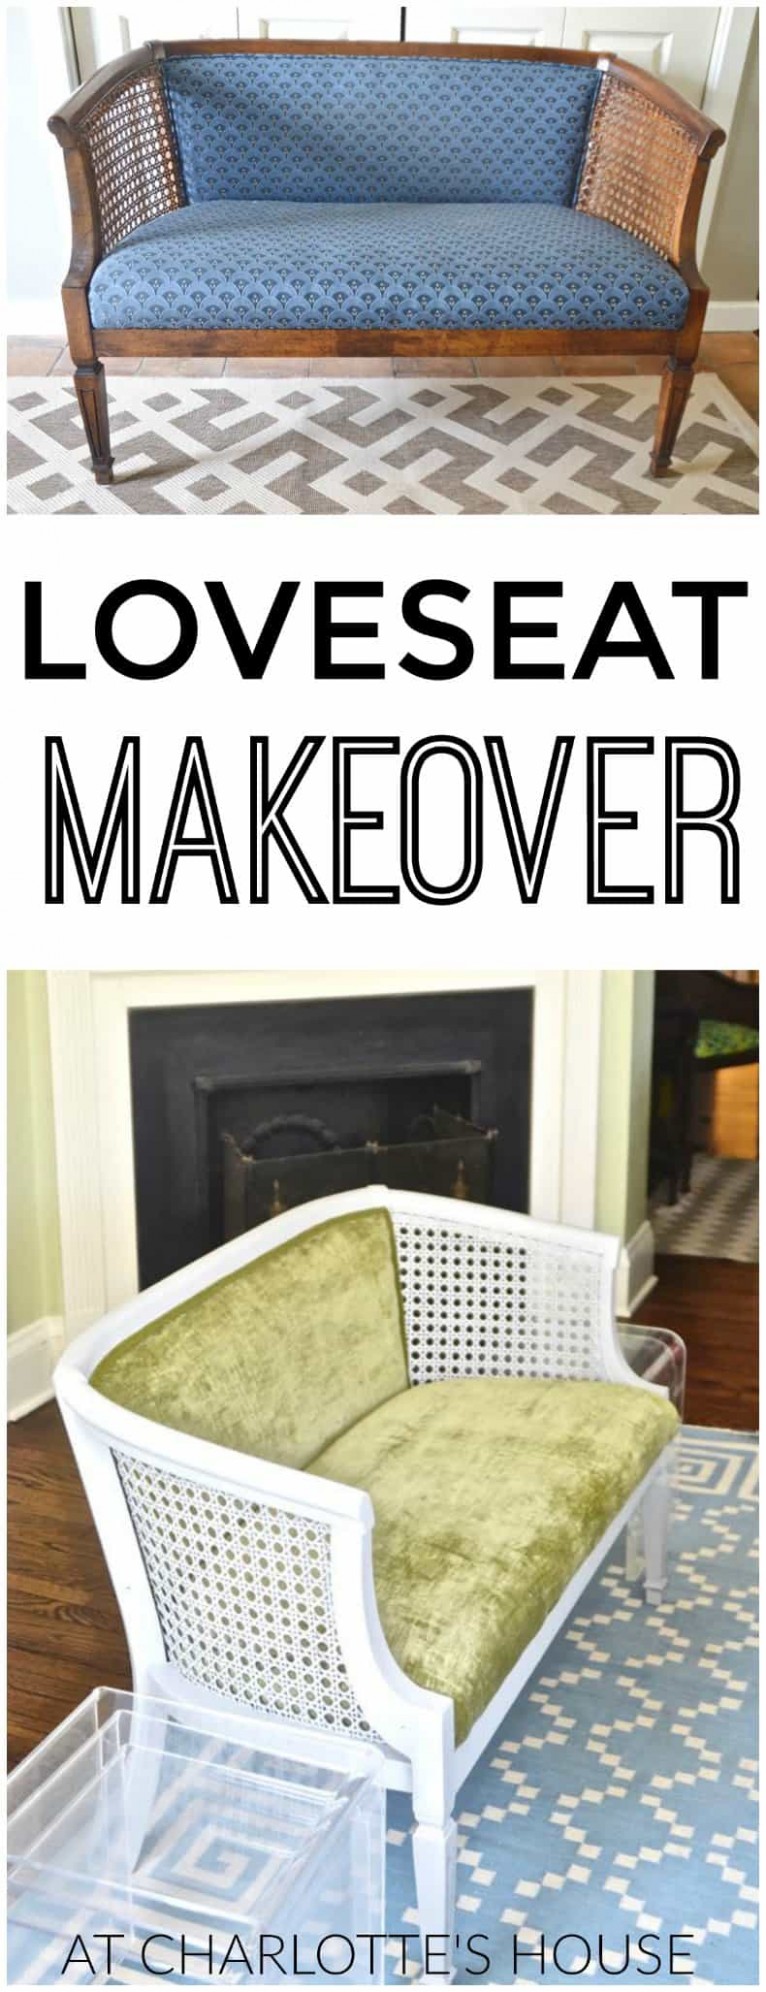 Refinished Cane Loveseat Where To Buy Annie Sloan Chalk Paint Charlotte Nc